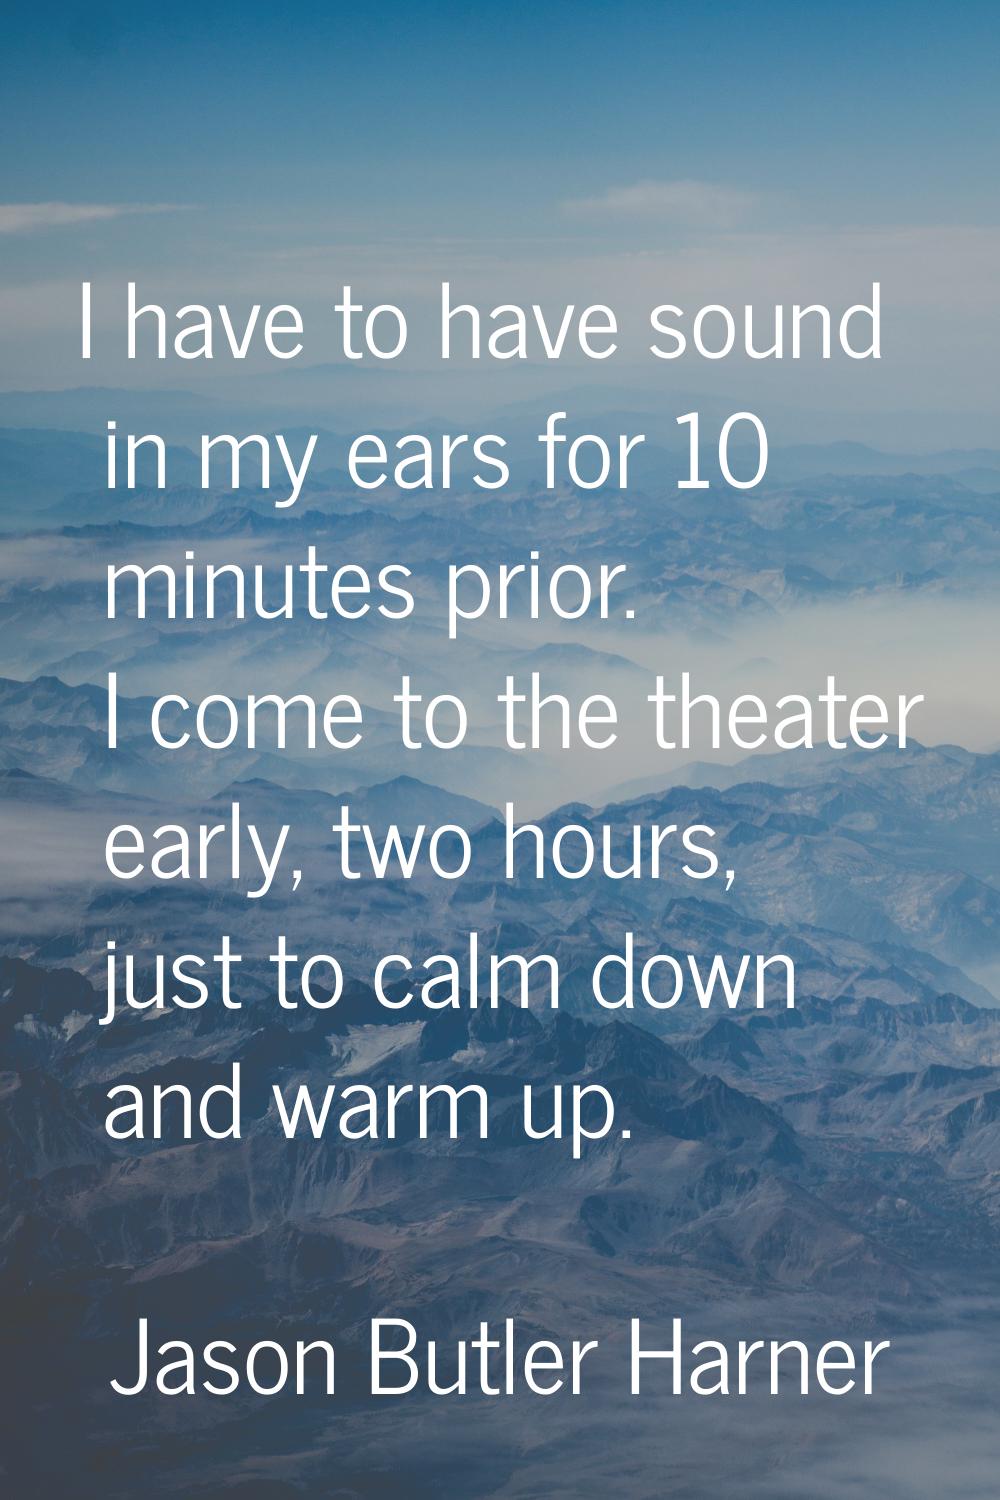 I have to have sound in my ears for 10 minutes prior. I come to the theater early, two hours, just 